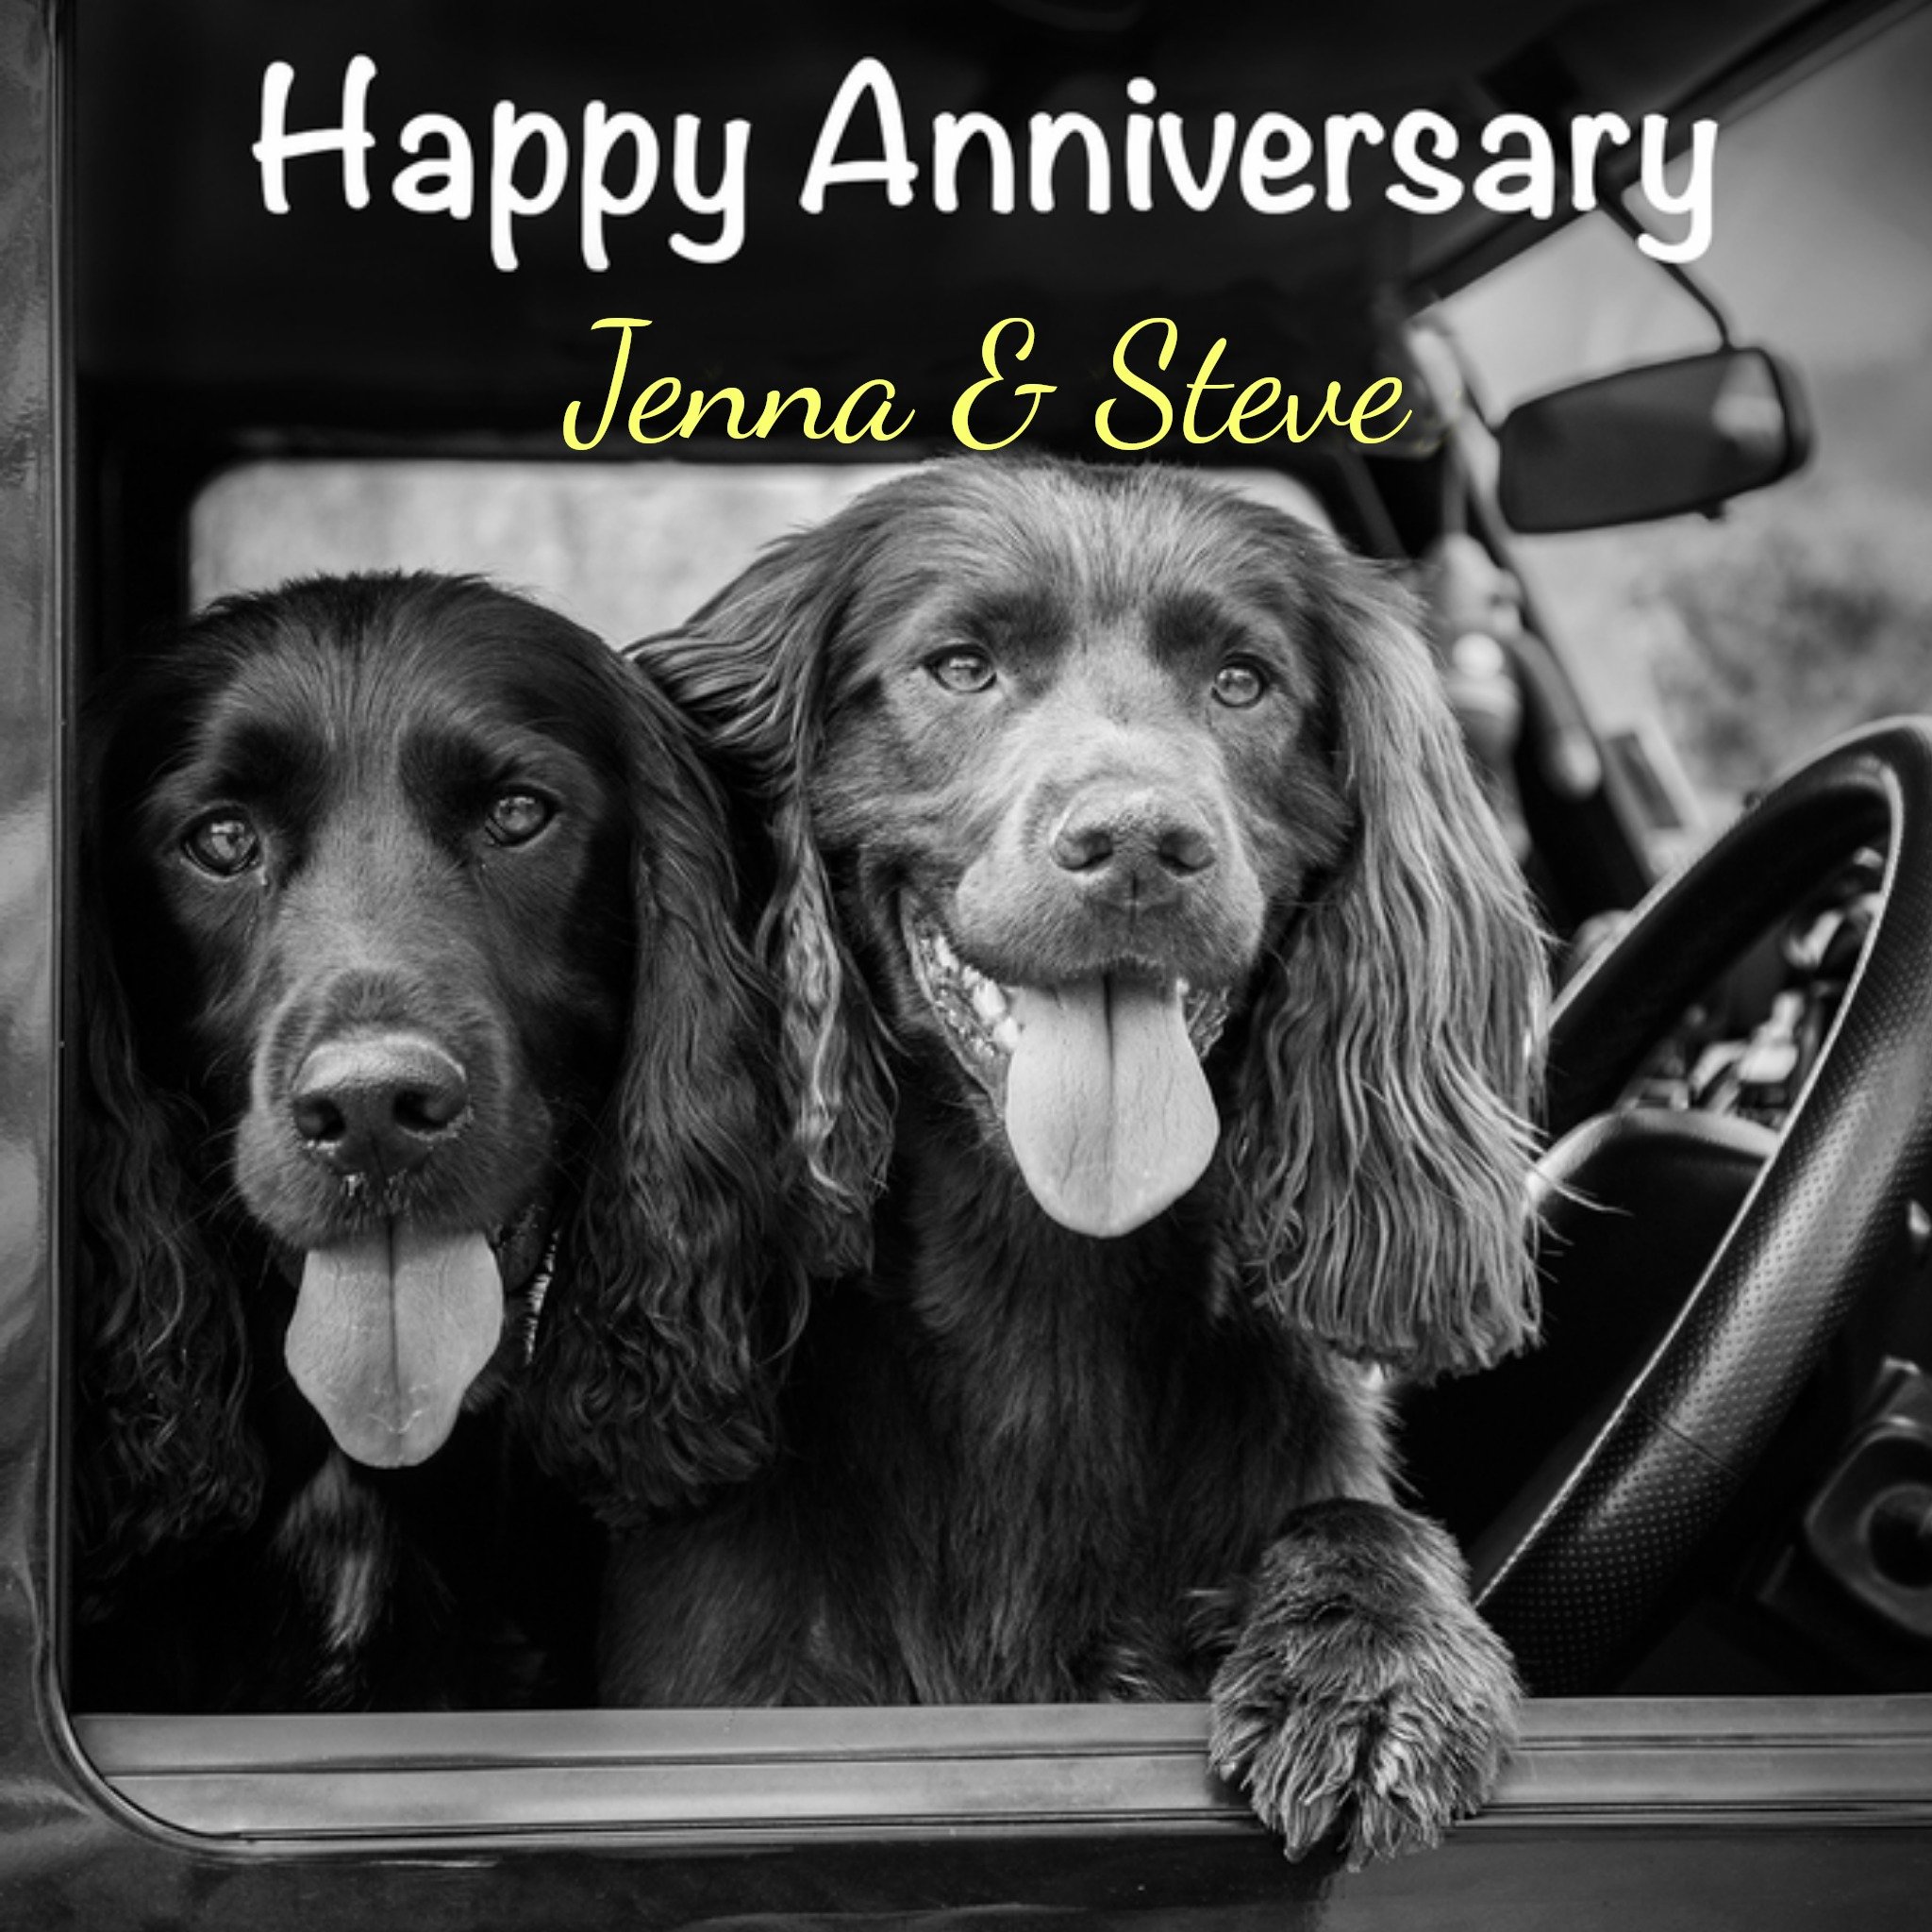 Moonpig Alex Sharp Photogrpahy Two Spaniel Dogs In A Car Happy Anniversary Card, Square